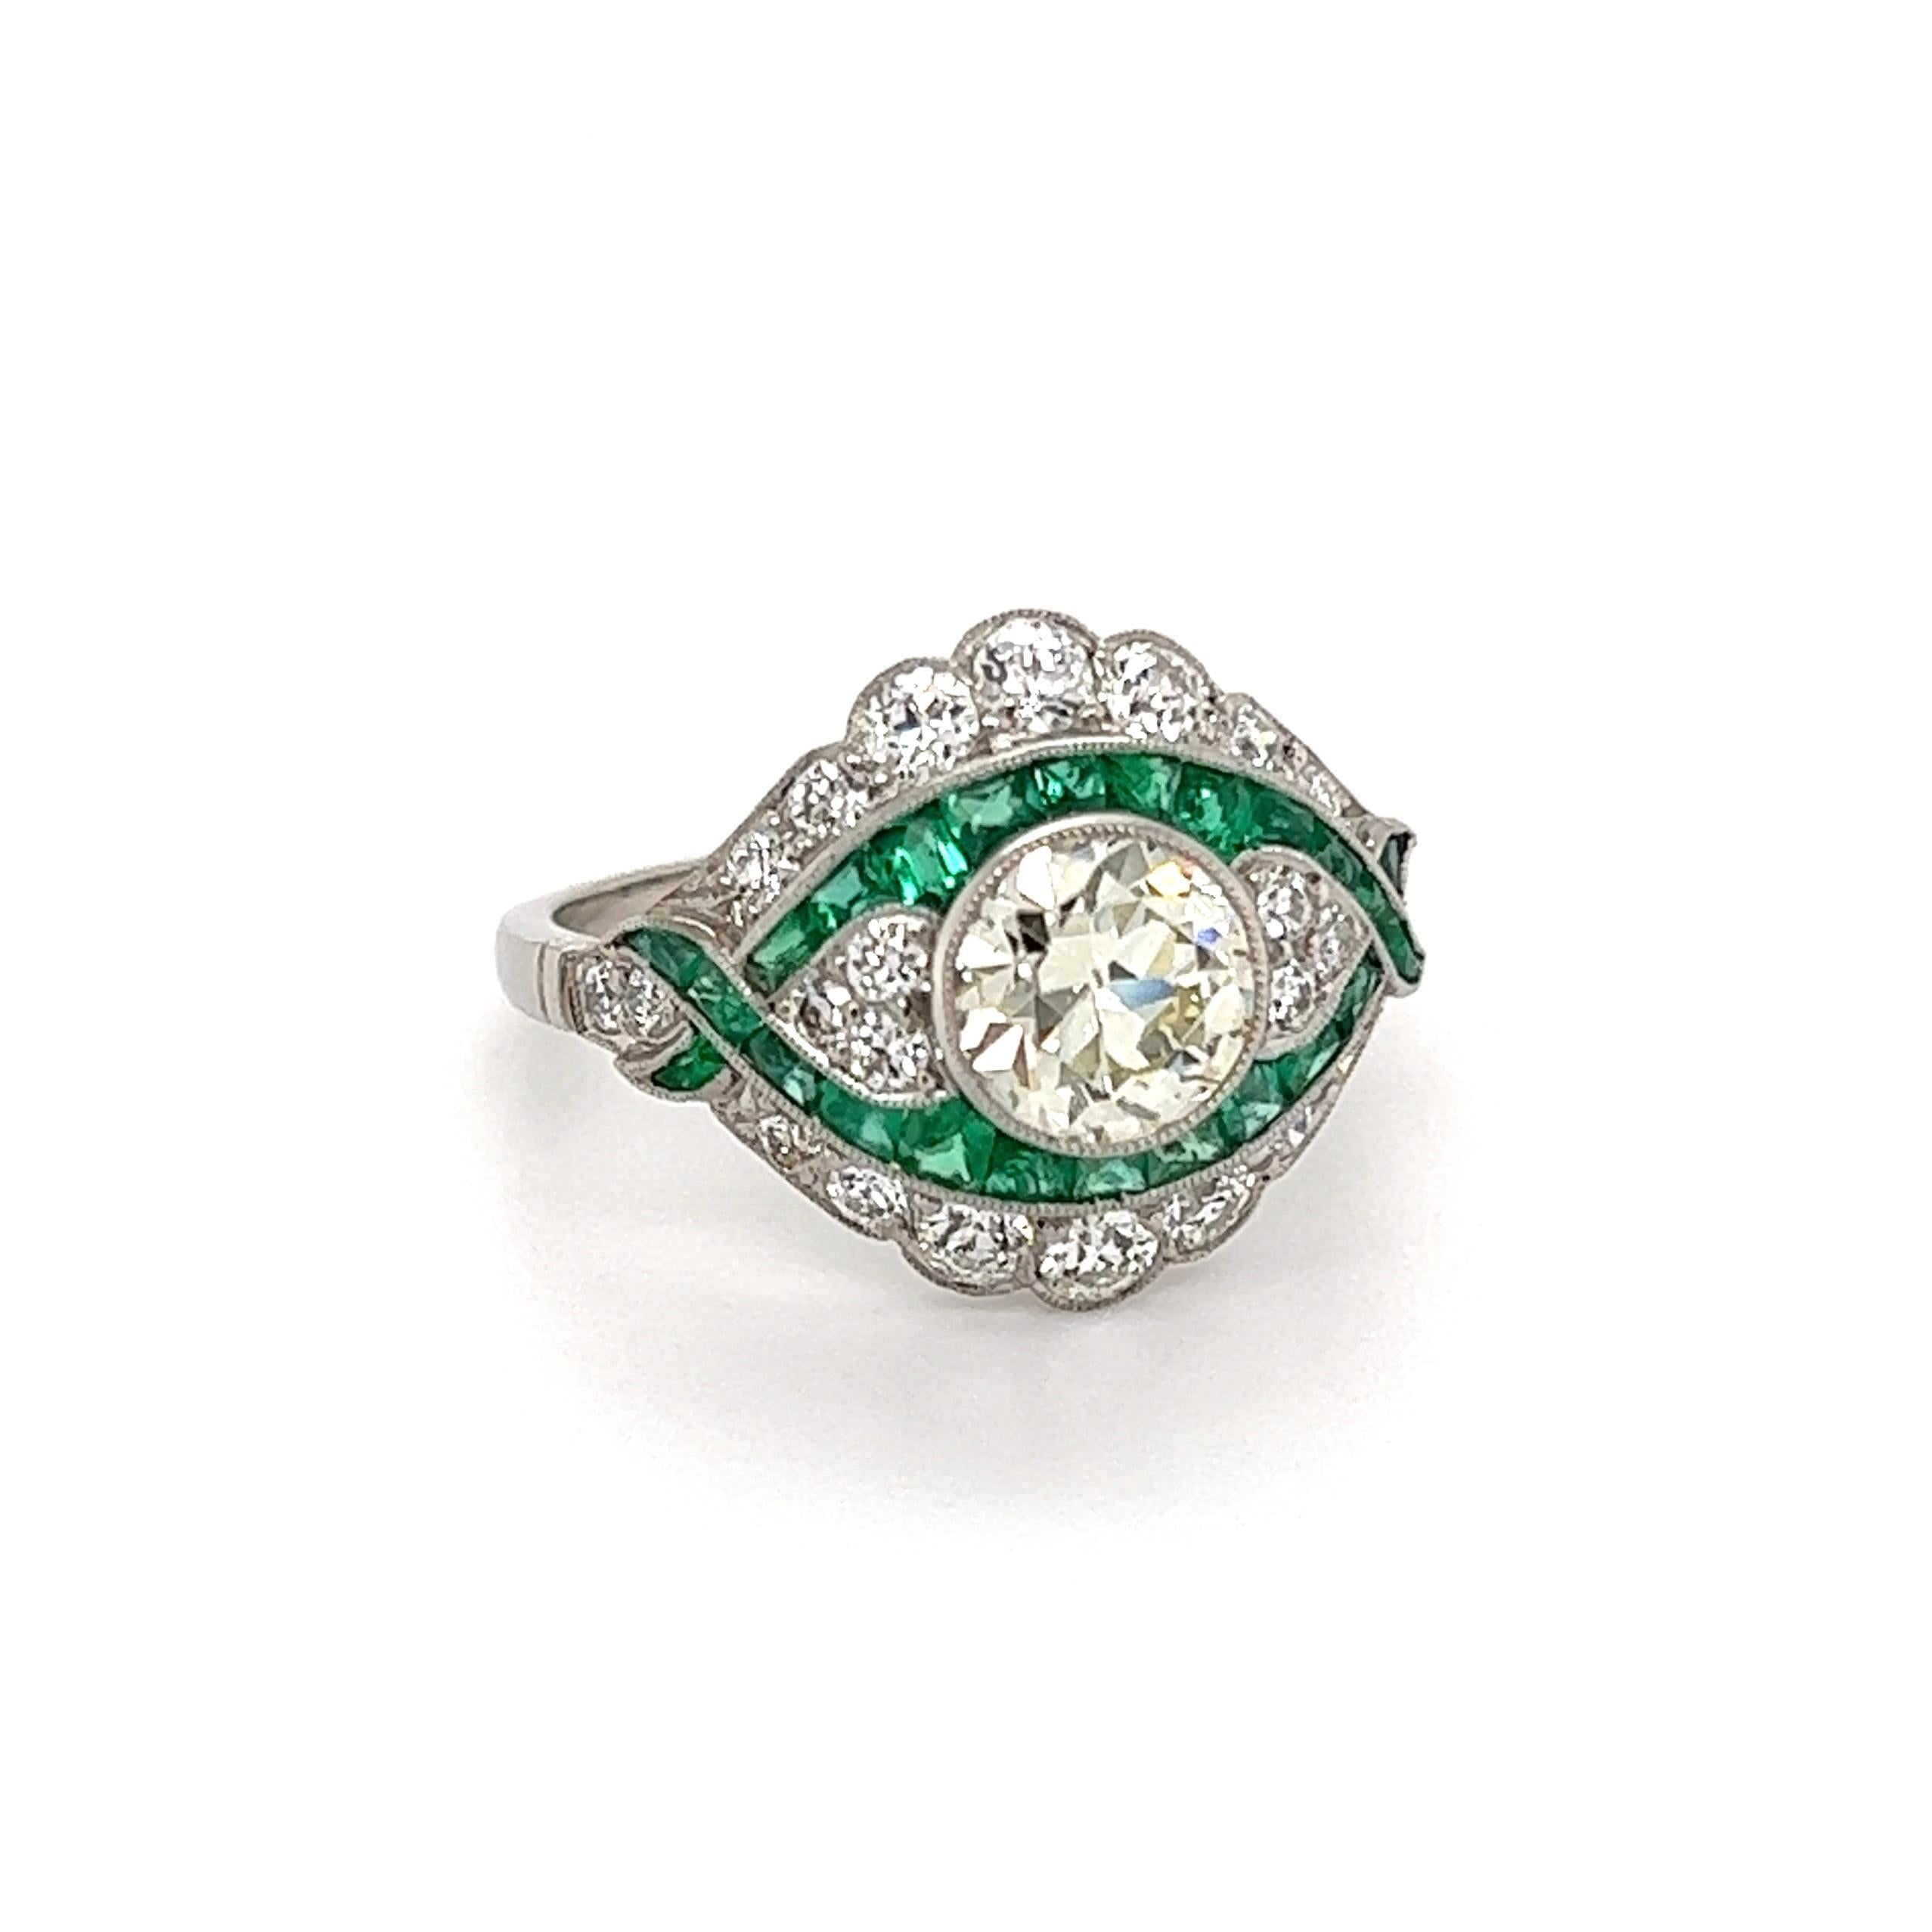 Simply Beautiful! Finely detailed Art Deco Revival Diamond and Emerald Cocktail Ring. Centering a securely nestled Hand set 1.18 Carat Old European-Cut Diamond, artistically surrounded by 24 Custom-Cut Emeralds, weighing approx. 0.97tcw and 24